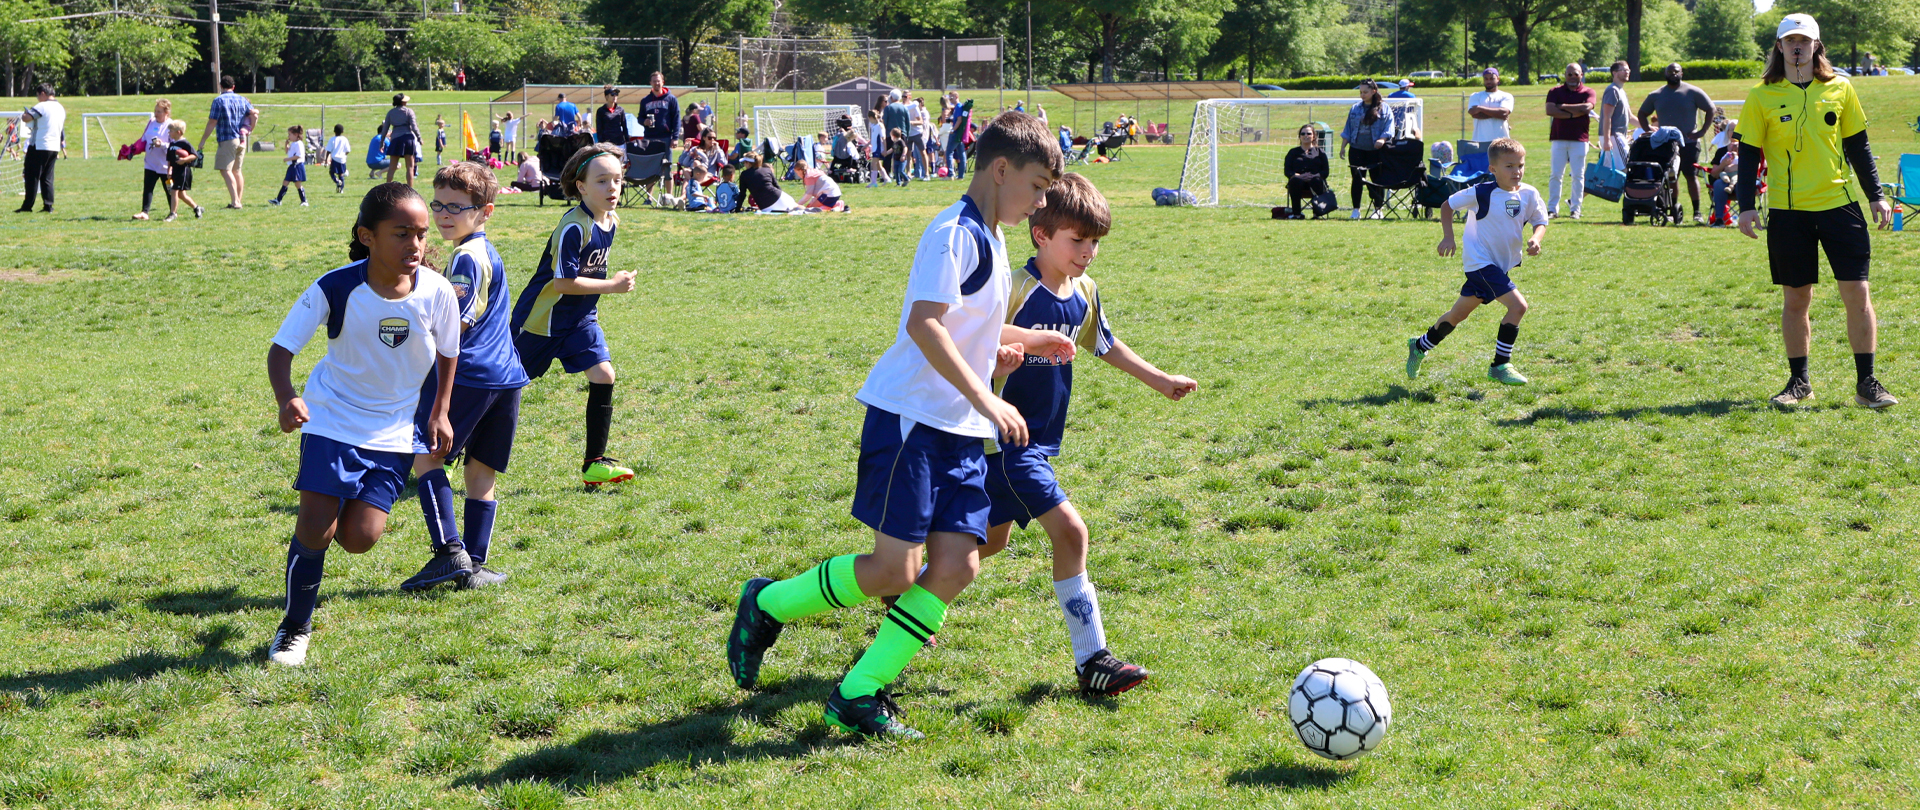 Youth Rec Soccer
CHAMP offers leagues for ages 3–18
 
